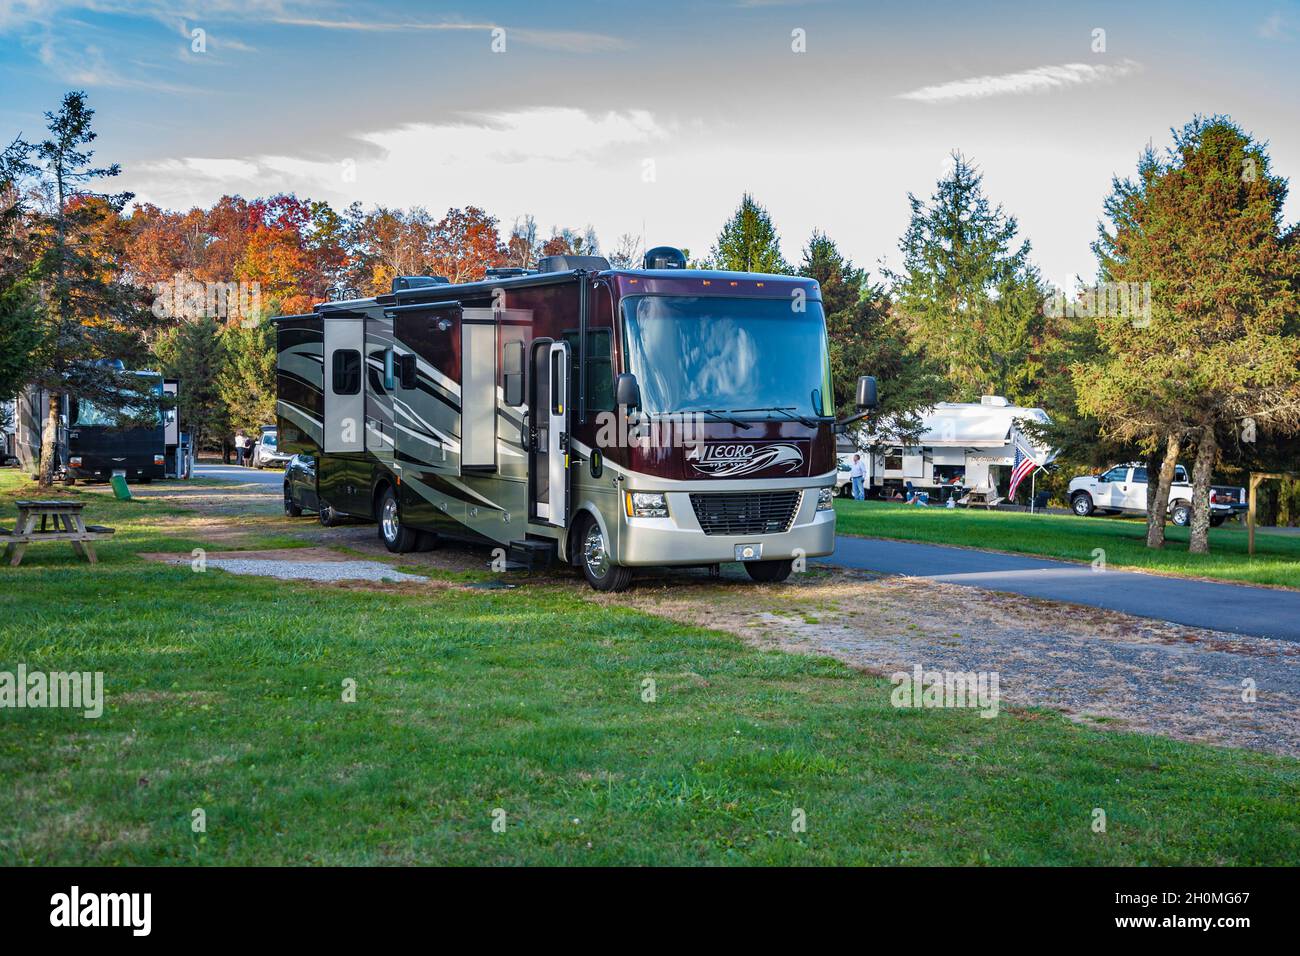 Tiffin Allegro Open Road class A motorhome at a campsite inside the Raccoon Holler Campground in Jefferson, North Carolina Stock Photo